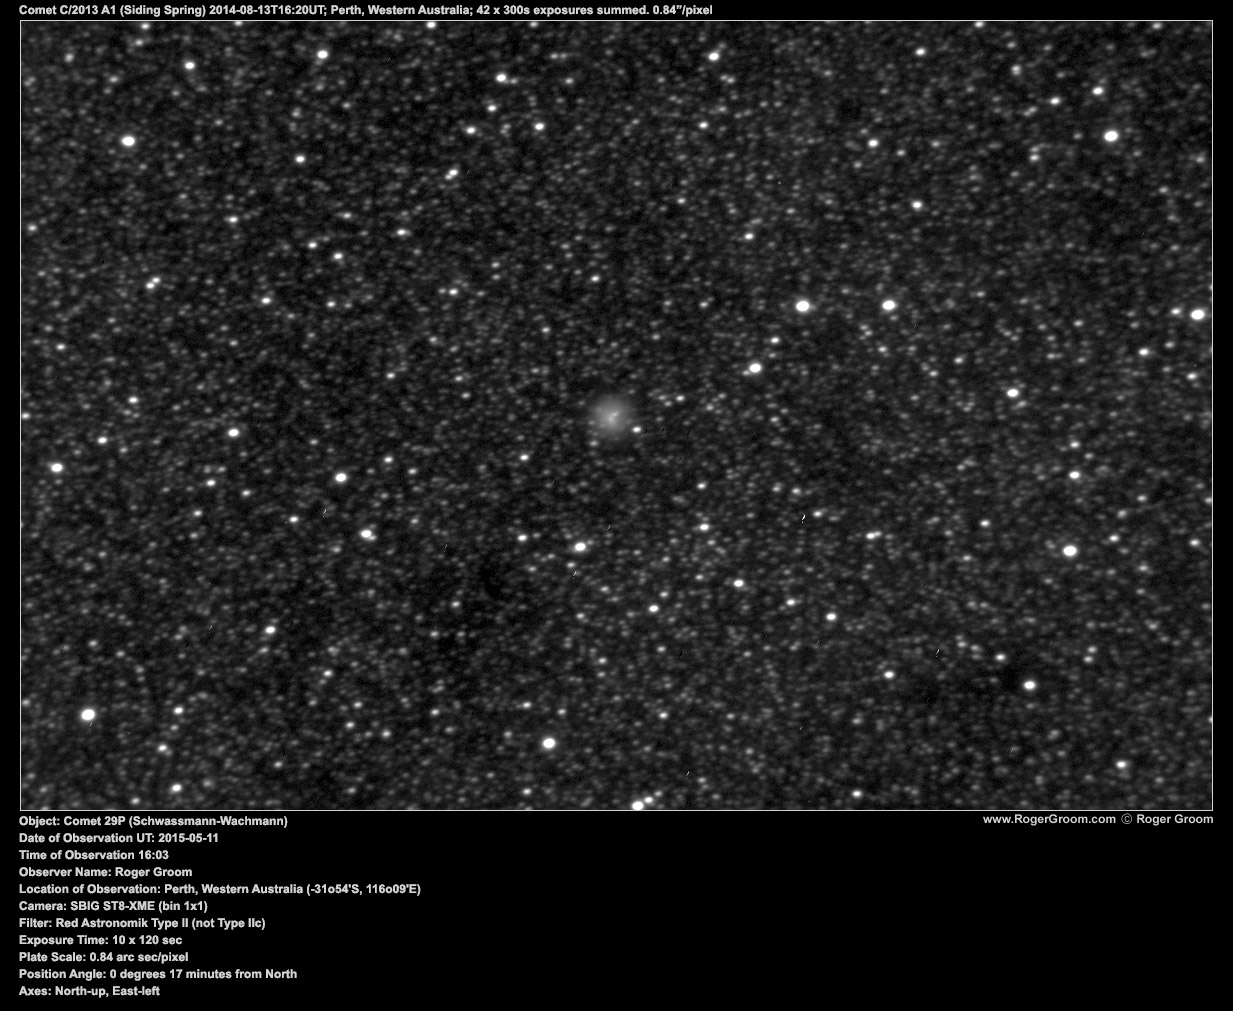 Object: Comet 29P (Schwassmann-Wachmann) Date of Observation UT: 2015-05-11 Time of Observation 16:03 Observer Name: Roger Groom Location of Observation: Perth, Western Australia (-31o54'S, 116o09'E) Camera: SBIG ST8-XME (bin 1x1) Filter: Red Astronomik Type II (not Type IIc) Exposure Time: 10 x 120 sec Plate Scale: 0.84 arc sec/pixel Position Angle: 0 degrees 17 minutes from North Axes: North-up, East-left